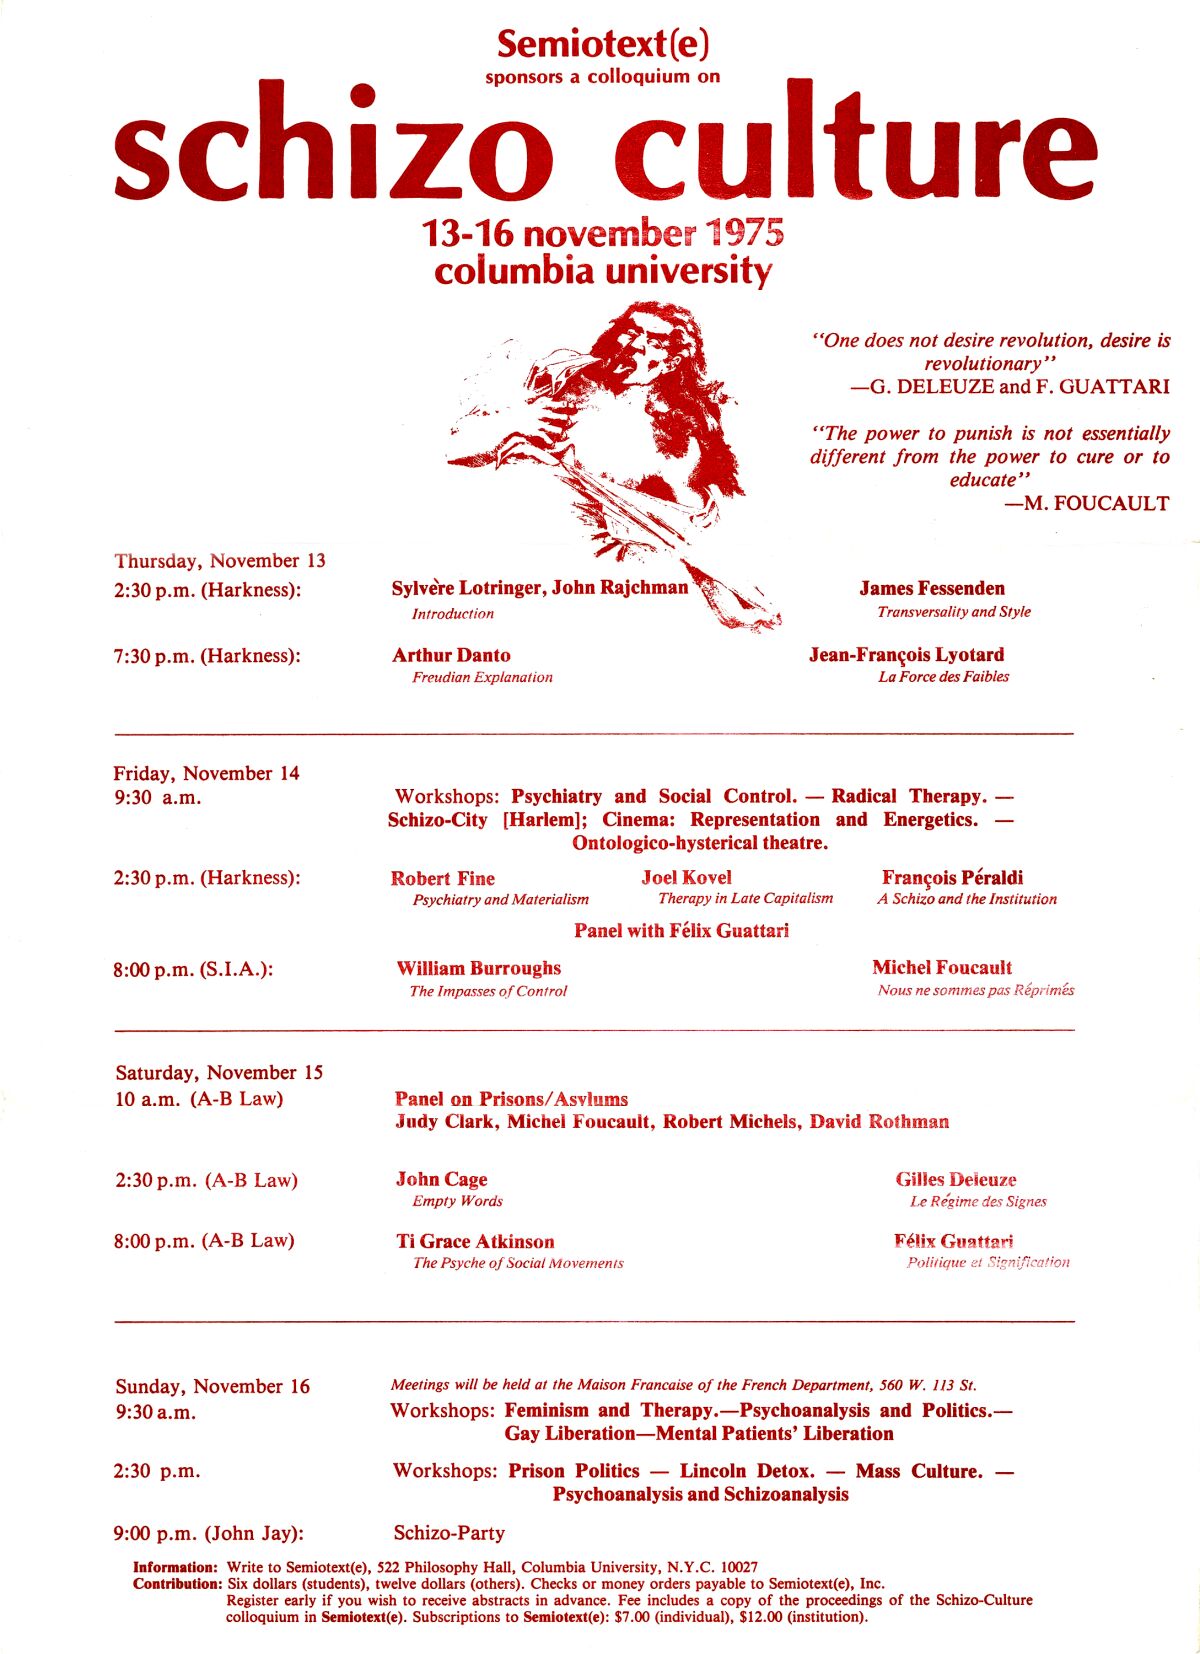 An event flyer features the words "schizo culture" in red ink along with a drawing of a screaming figure